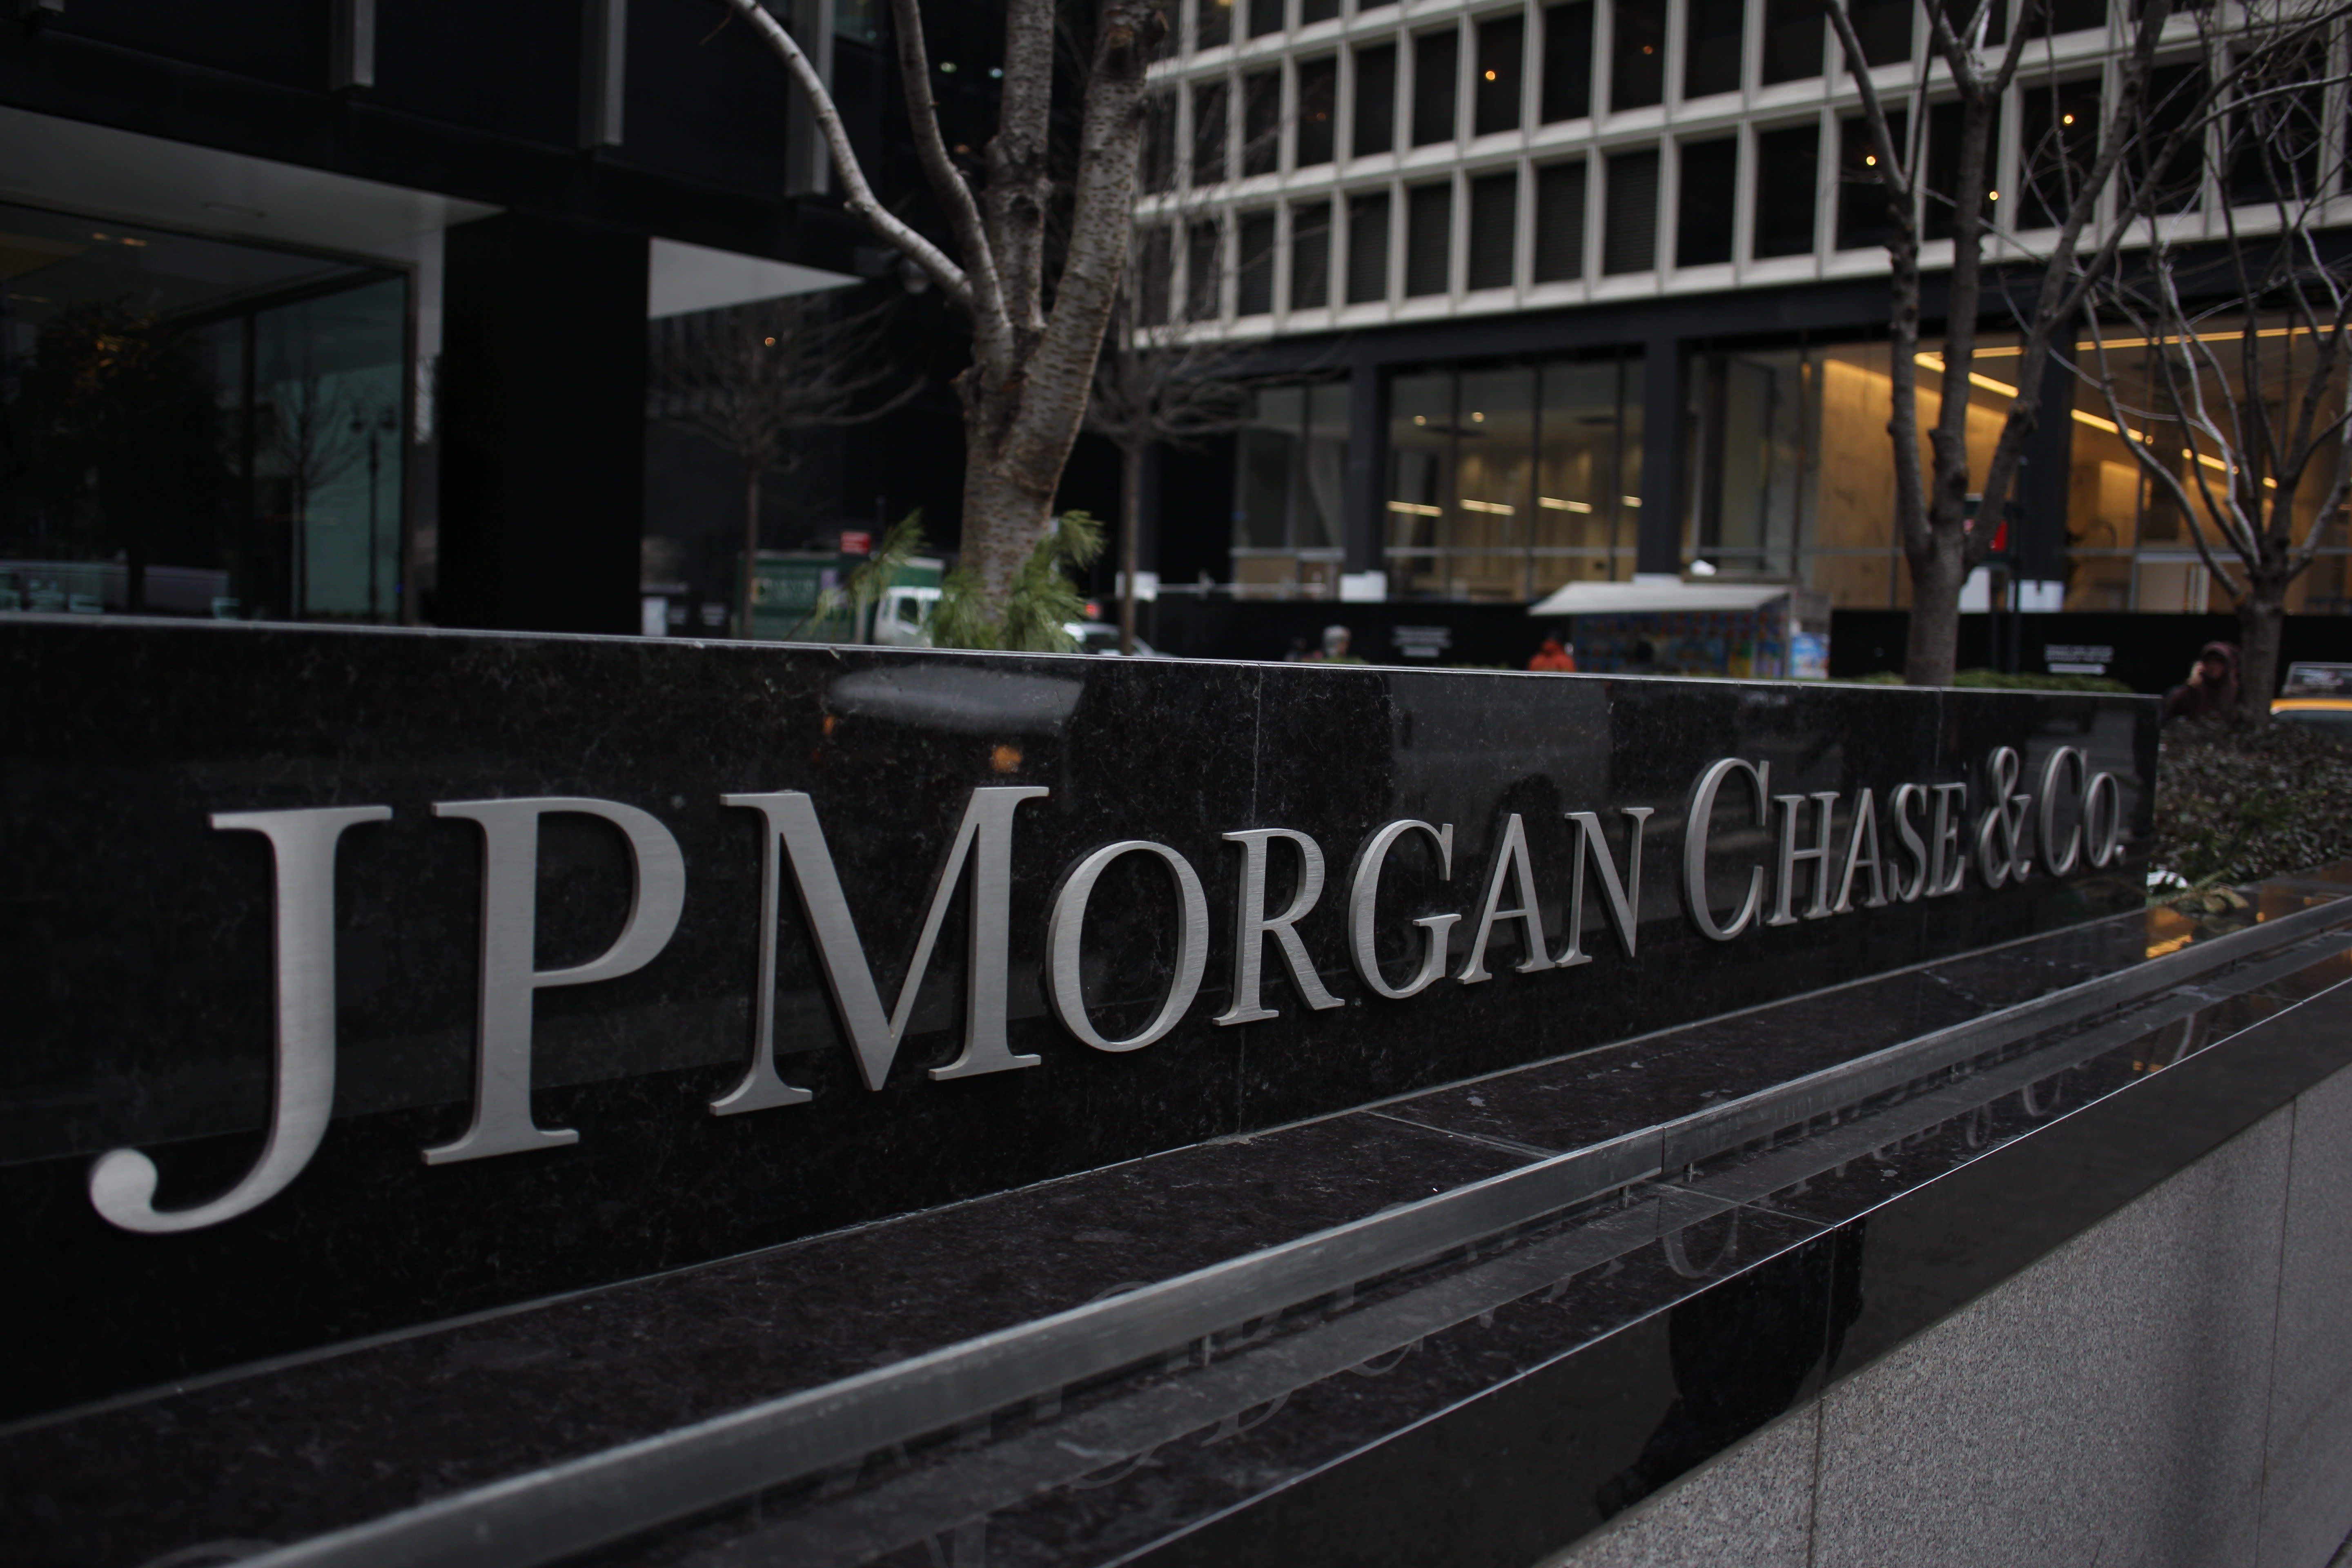 JPMorgan Chase tells U.S. employees they are expected back to the office on a rotating basis